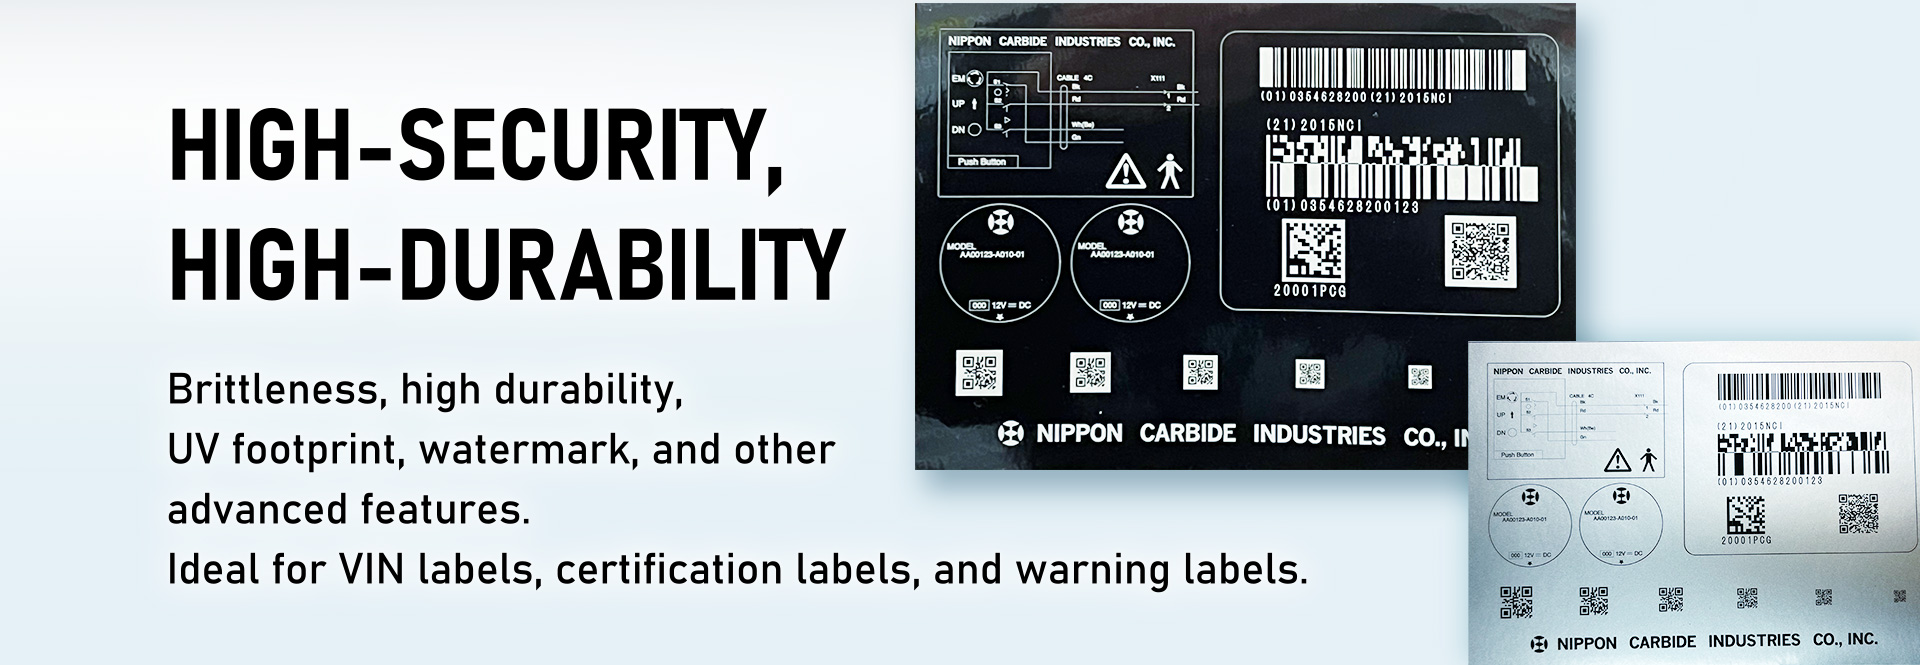 HIGH-SECURITY, HIGH-DURABILITY Brittleness, high durability, UV footprint, watermark, and other advanced features. Ideal for VIN labels, certification labels, and warning labels.